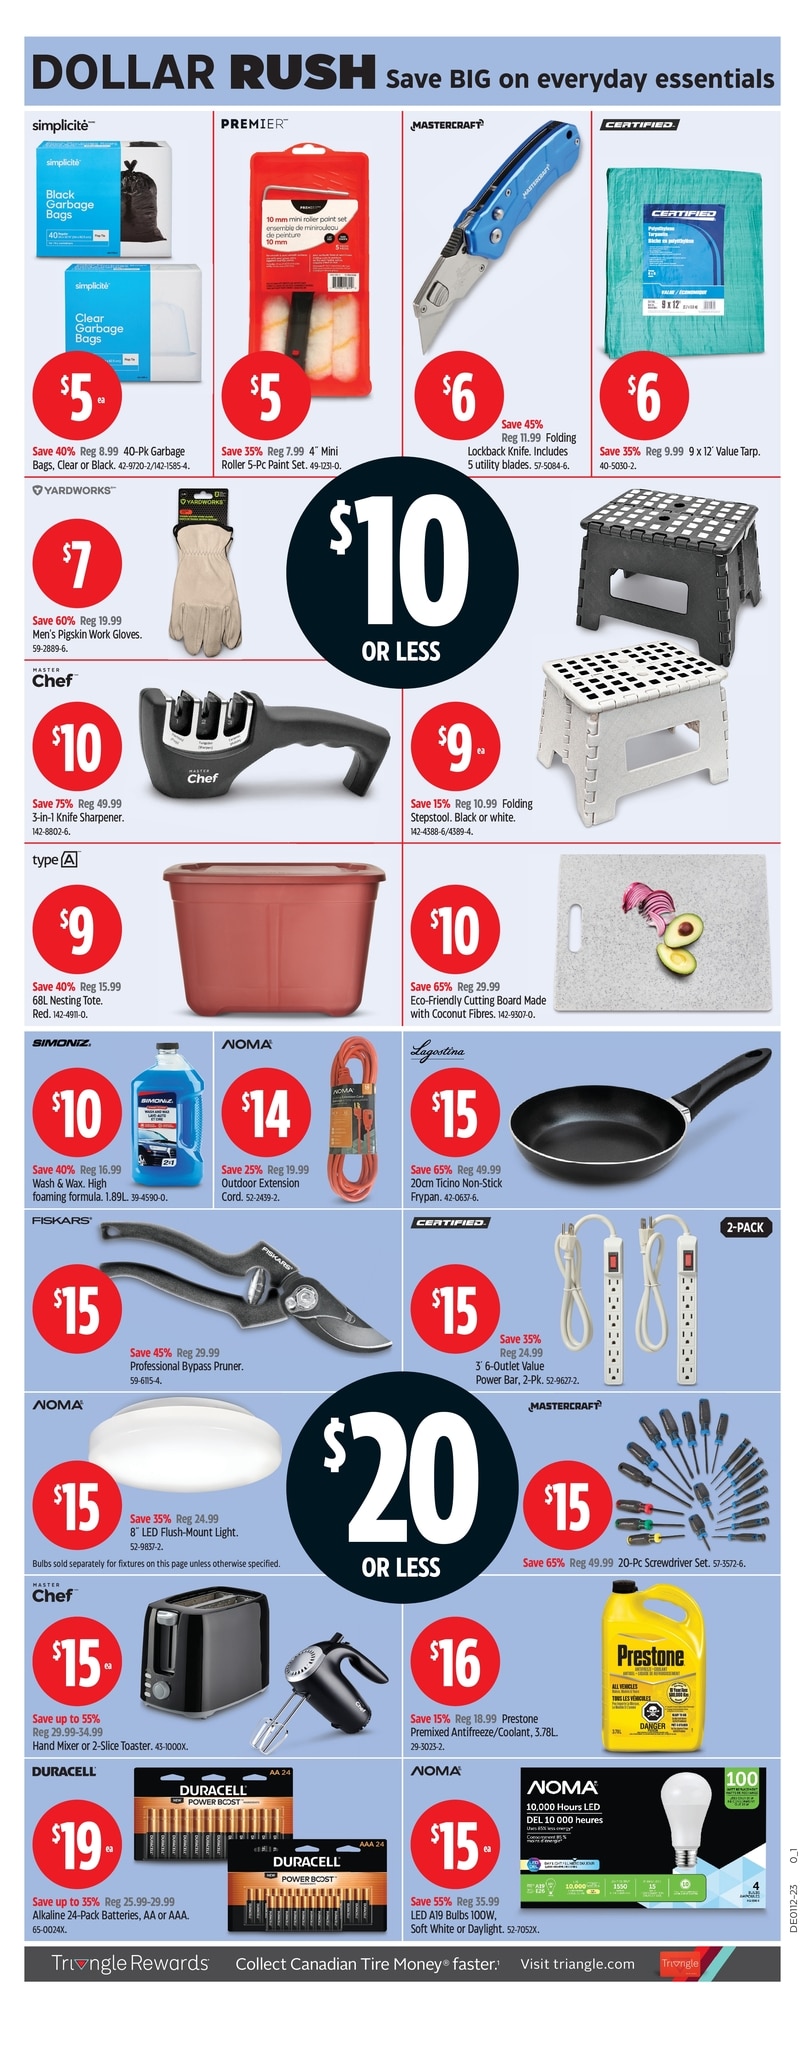 Canadian Tire - Weekly Flyer Specials - Page 3